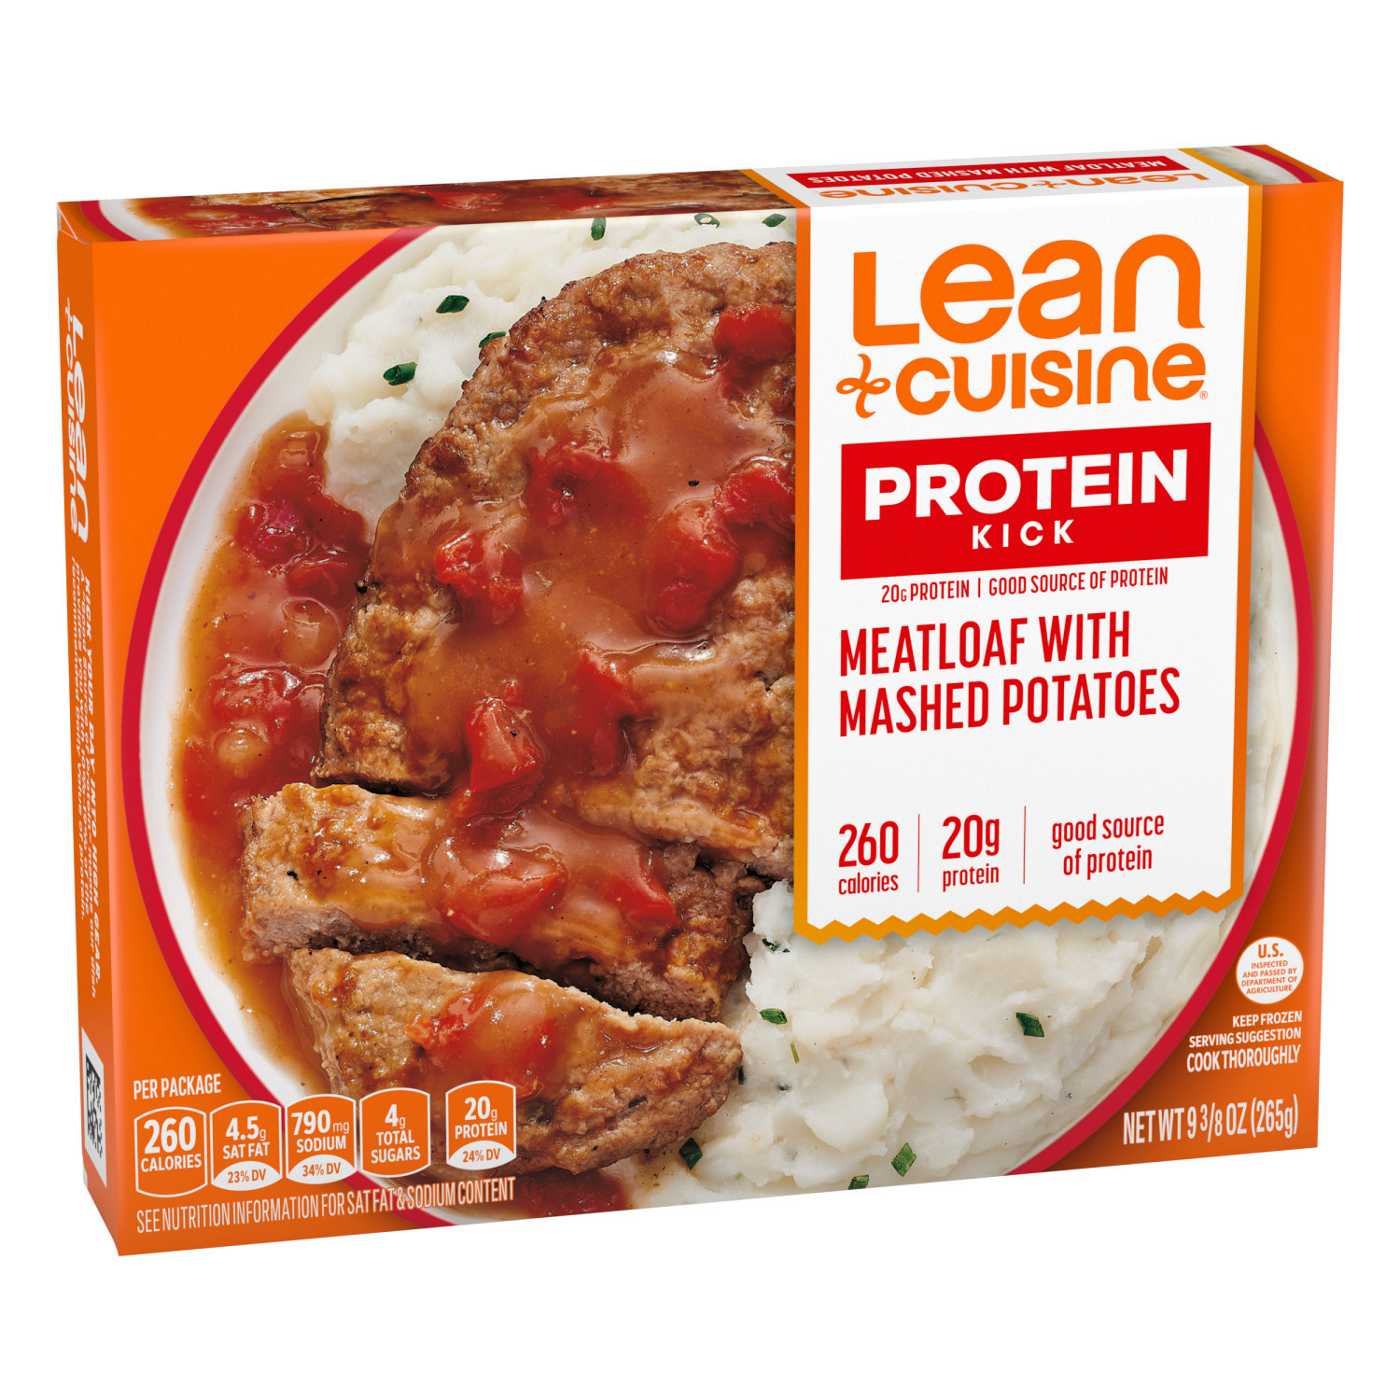 Lean Cuisine 21g Protein Meatloaf & Mashed Potatoes Frozen Meal; image 4 of 4